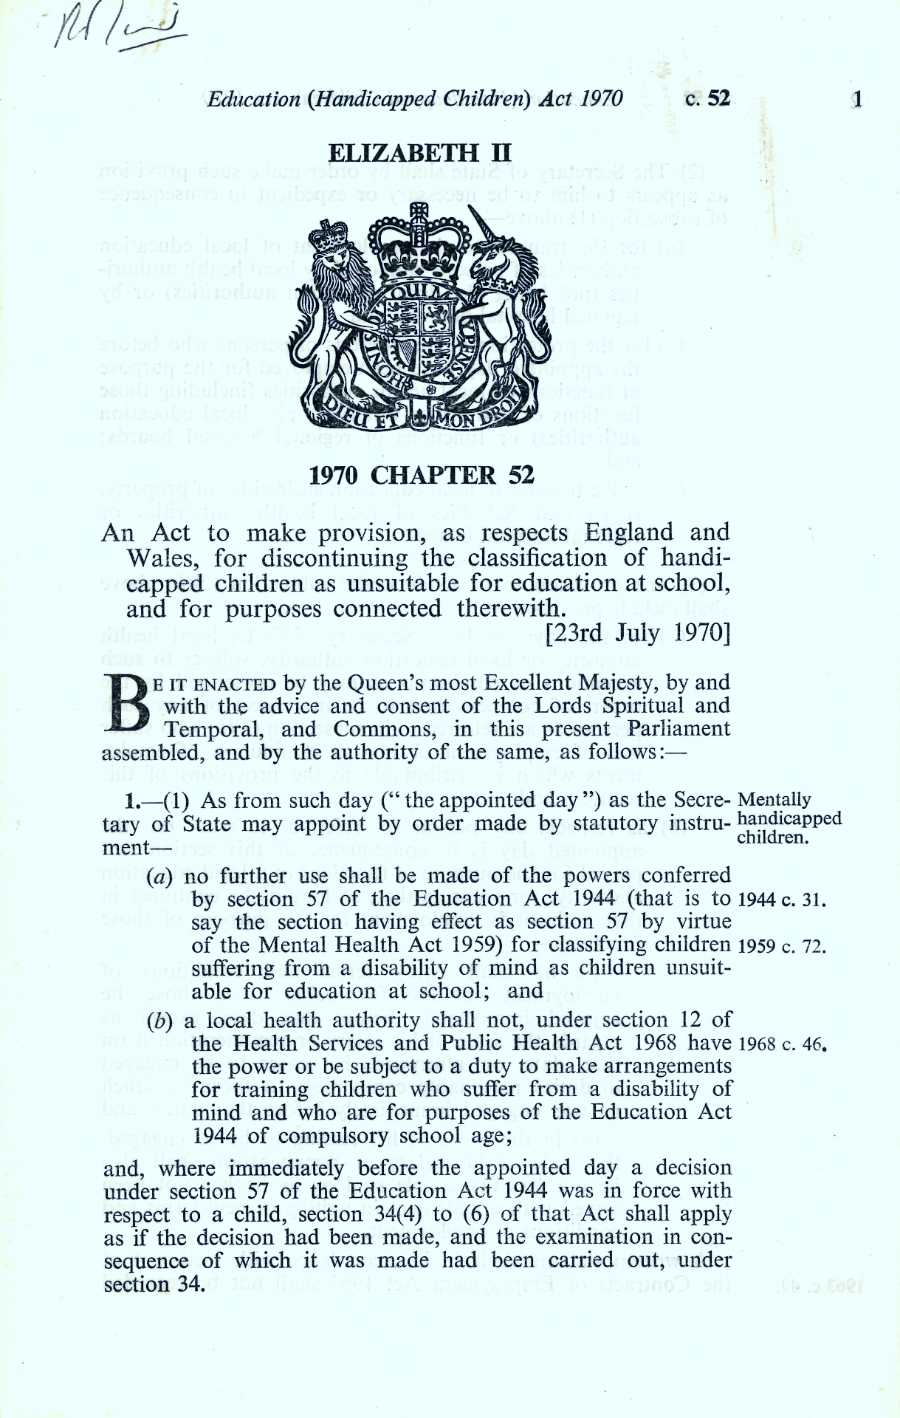 The Education (Handicapped Children) Act, 1970